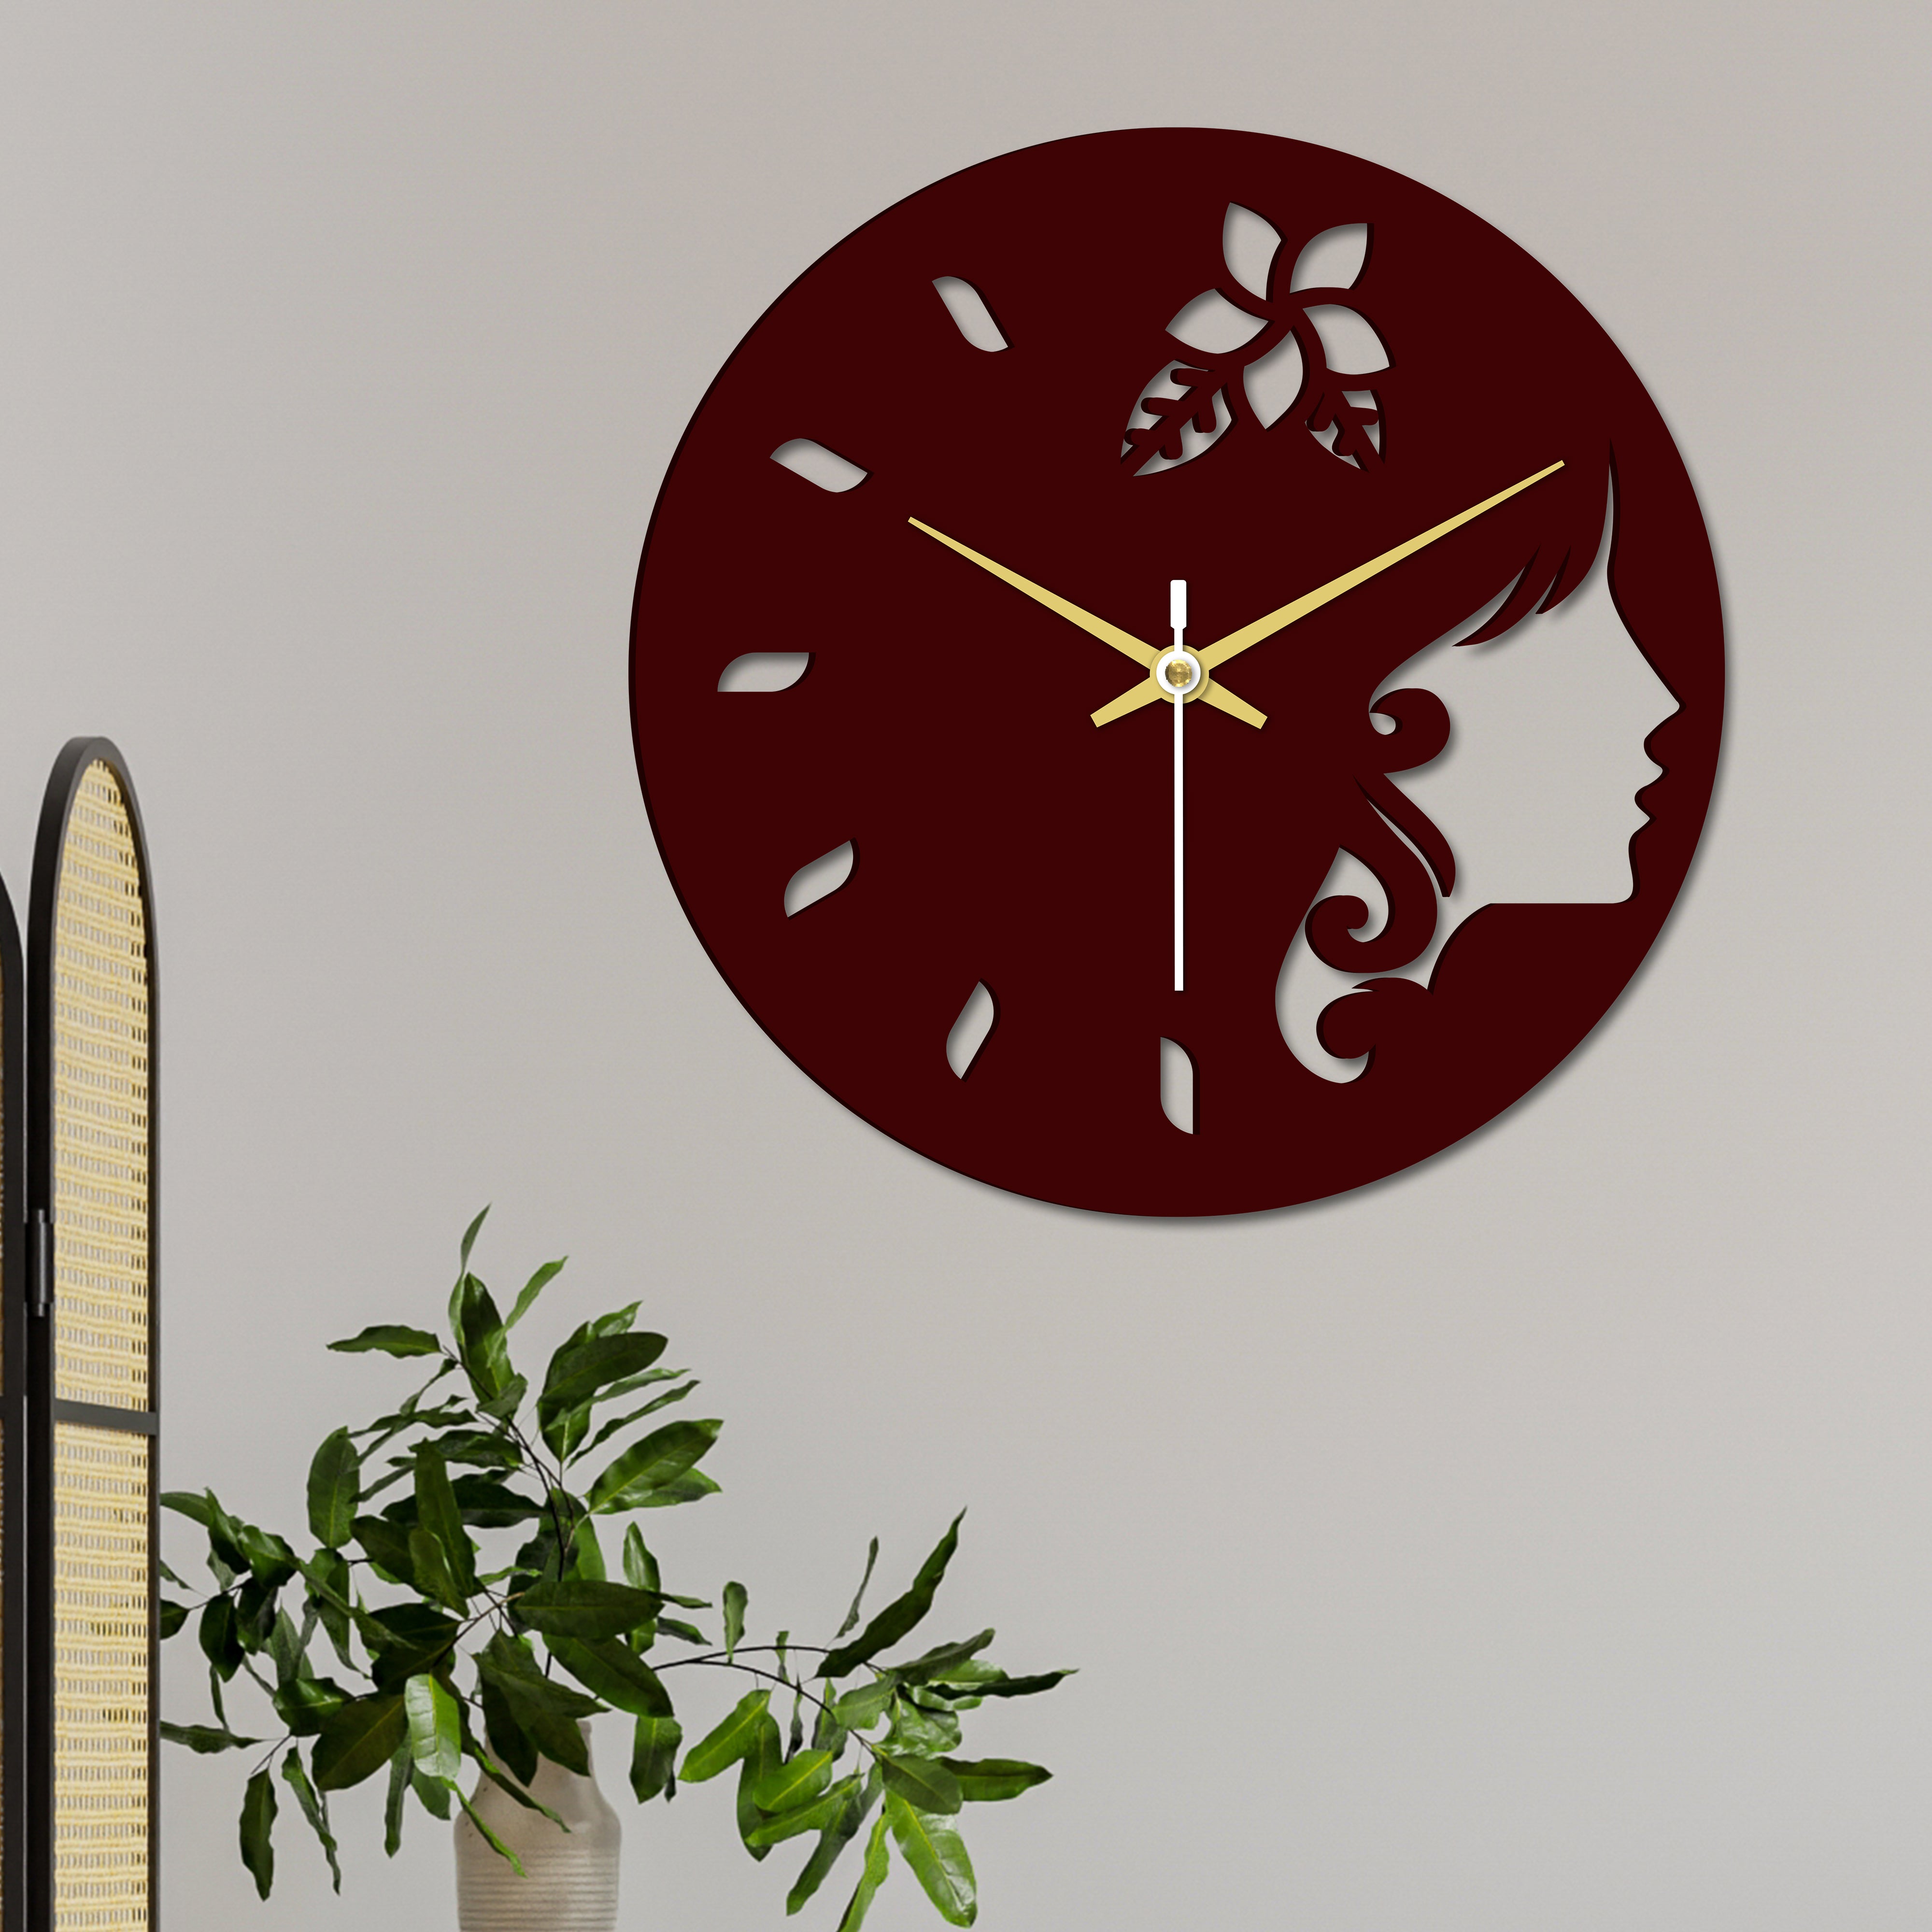 Wall Clock for Room